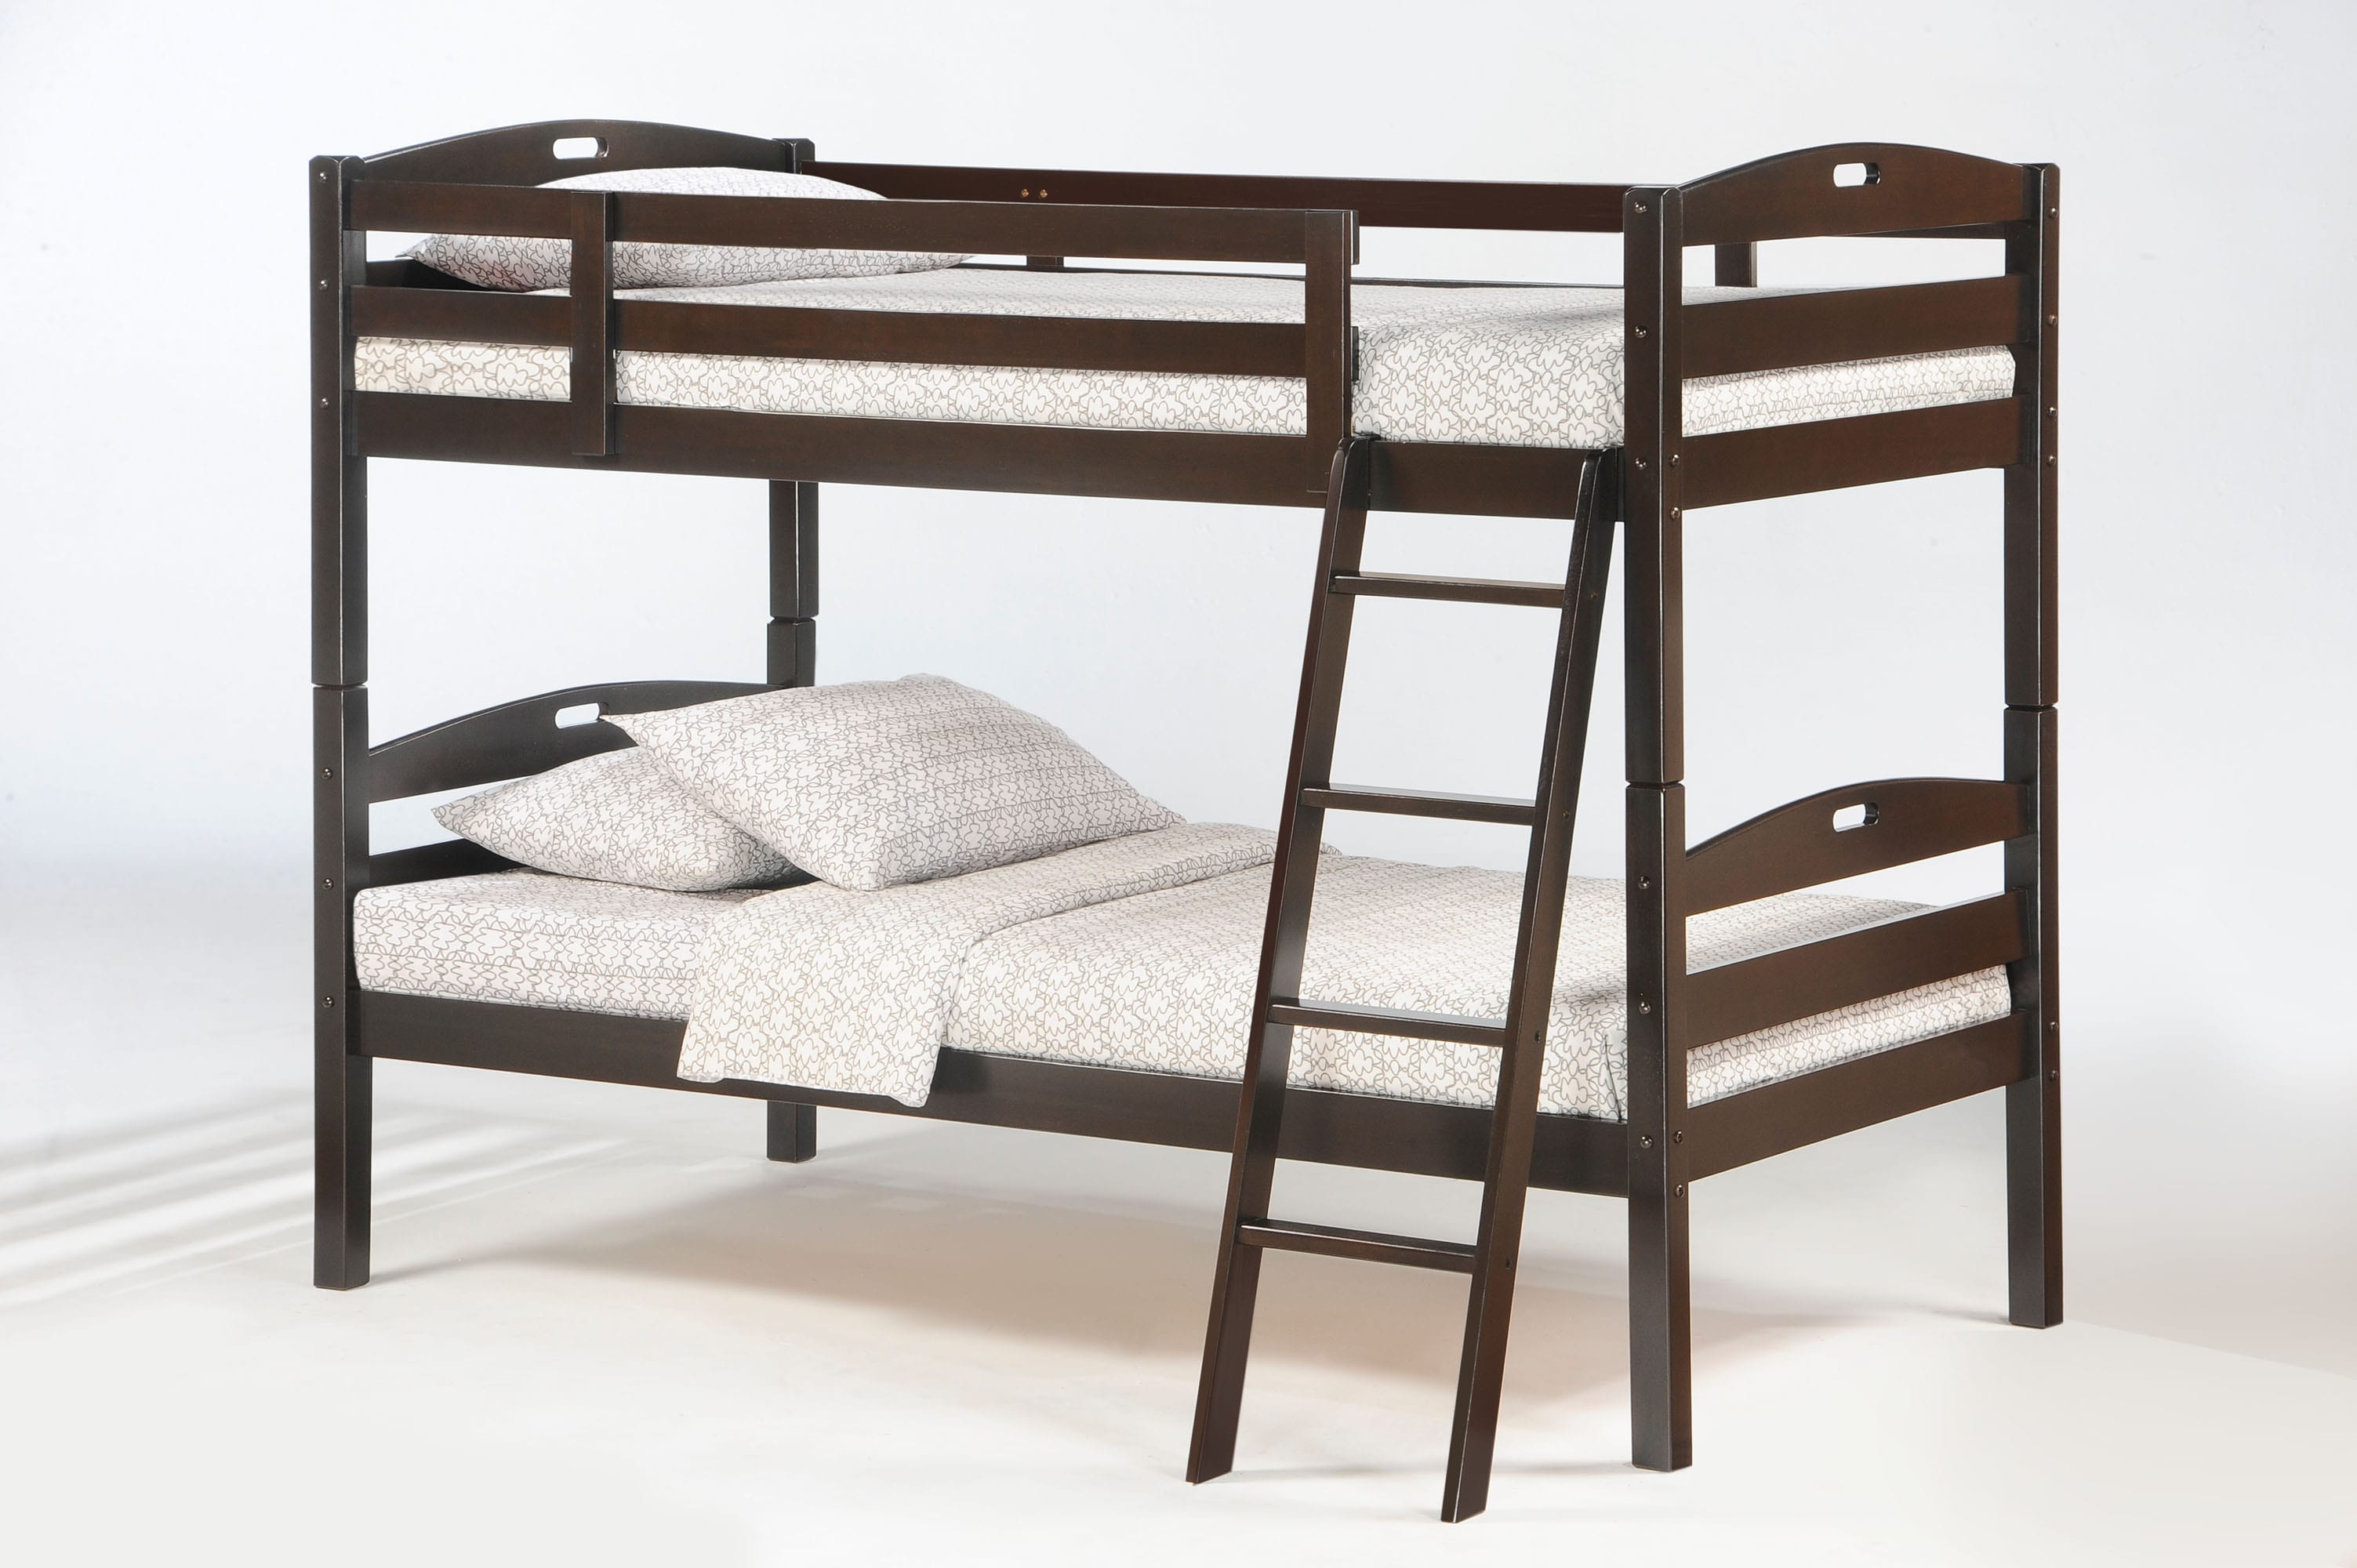 twin bunk beds